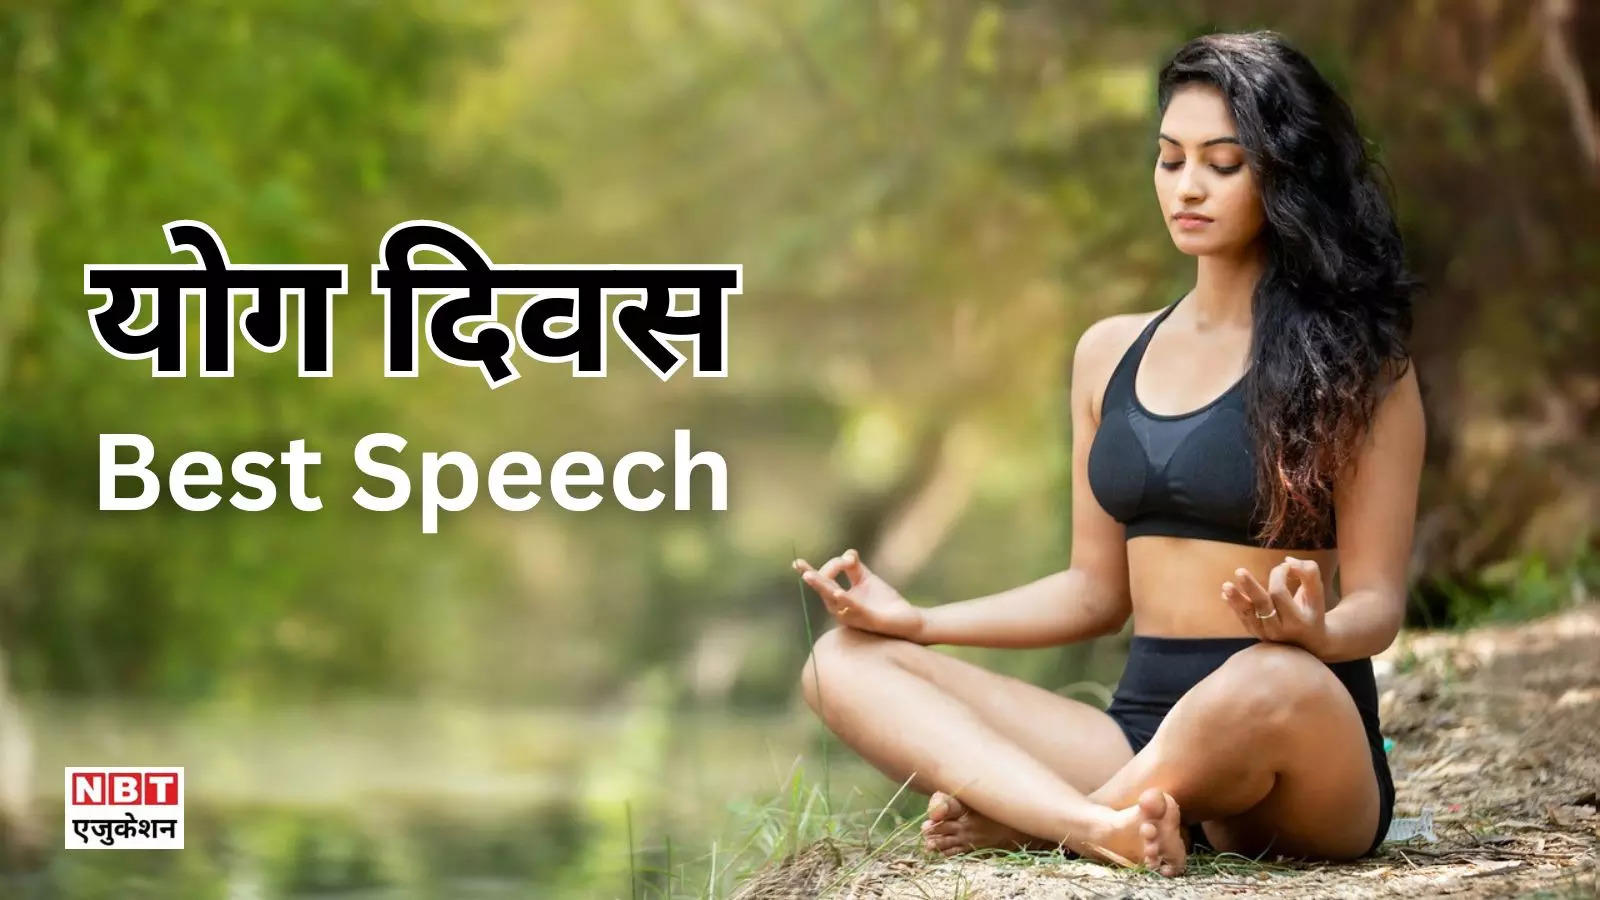 Yoga Day Speech Ideas: This 2 minute speech on Yoga Day will make people your fan